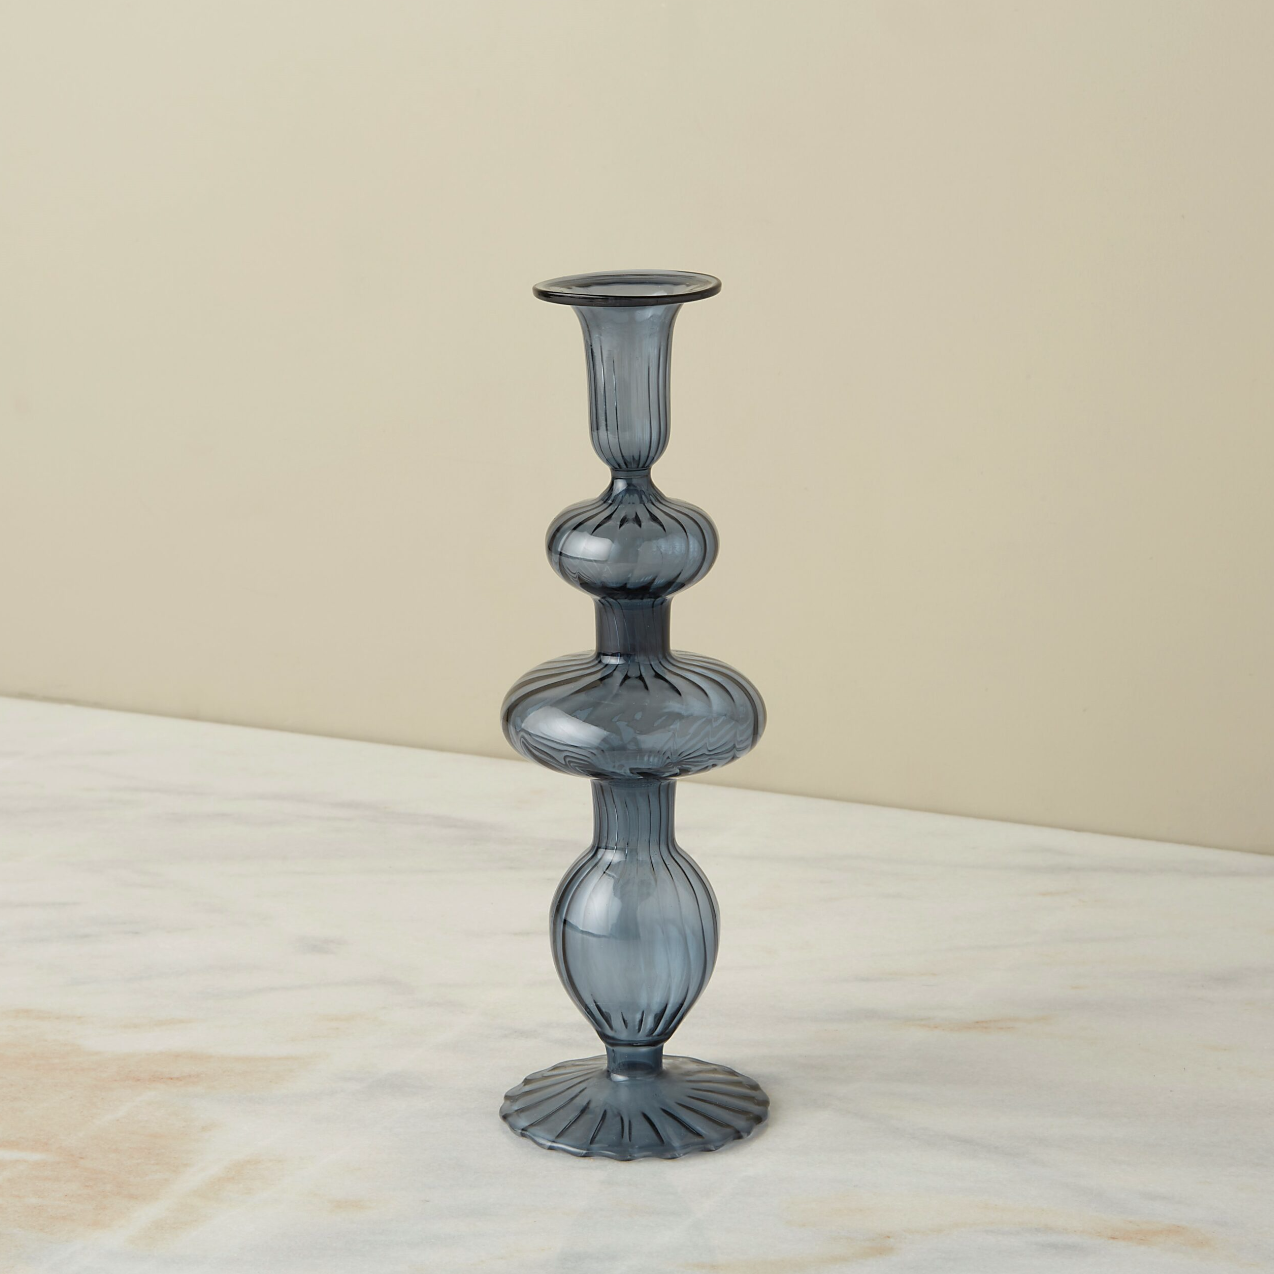 Glass Candlestick, Nocturne